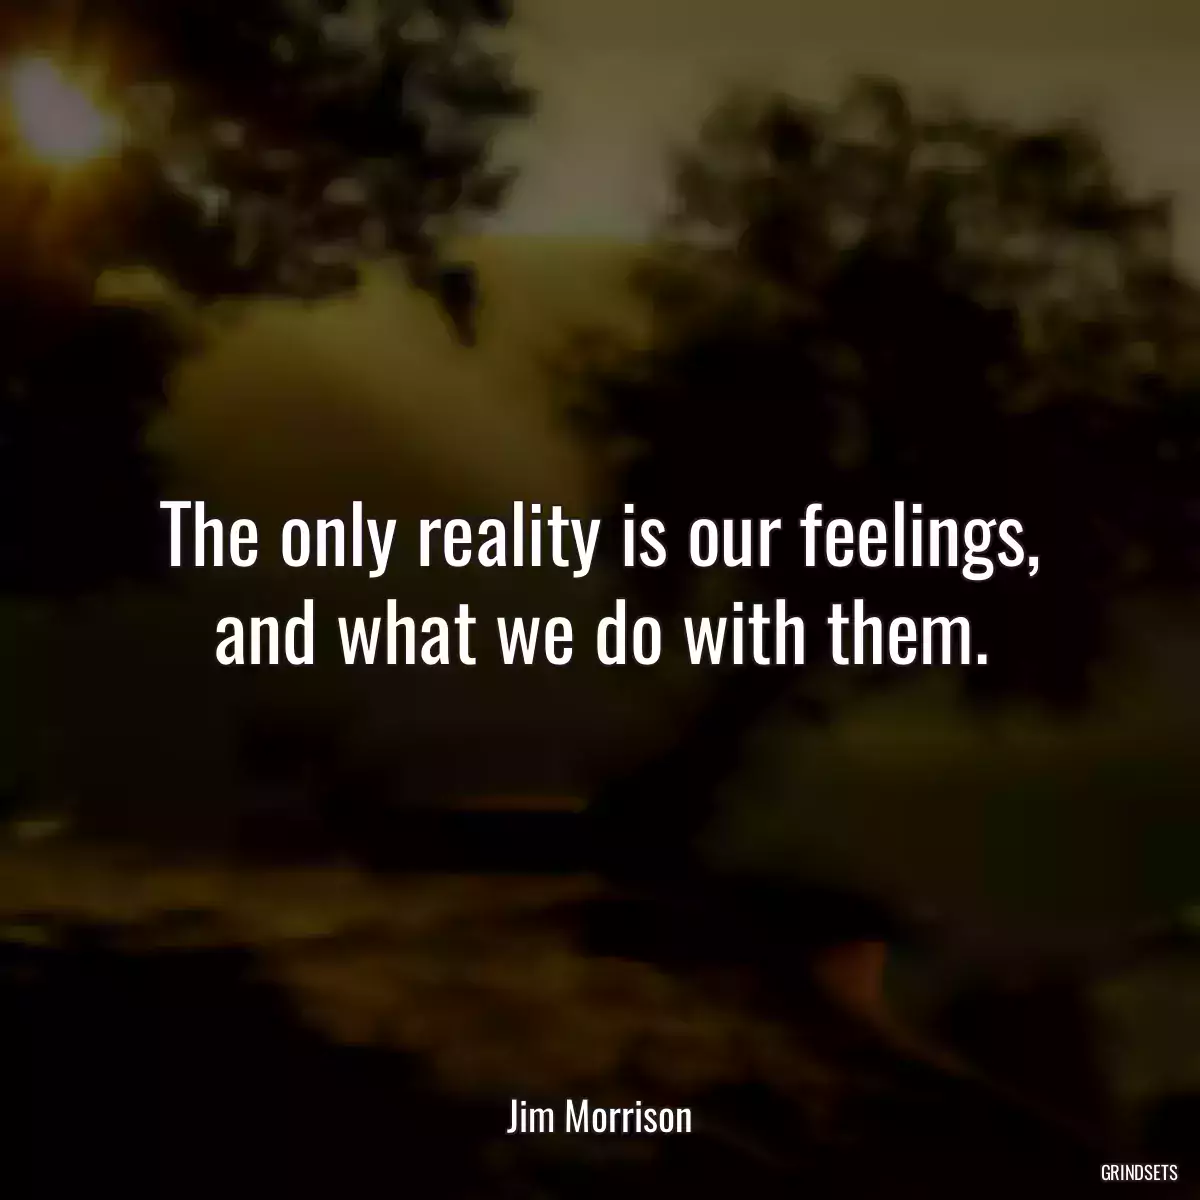 The only reality is our feelings, and what we do with them.